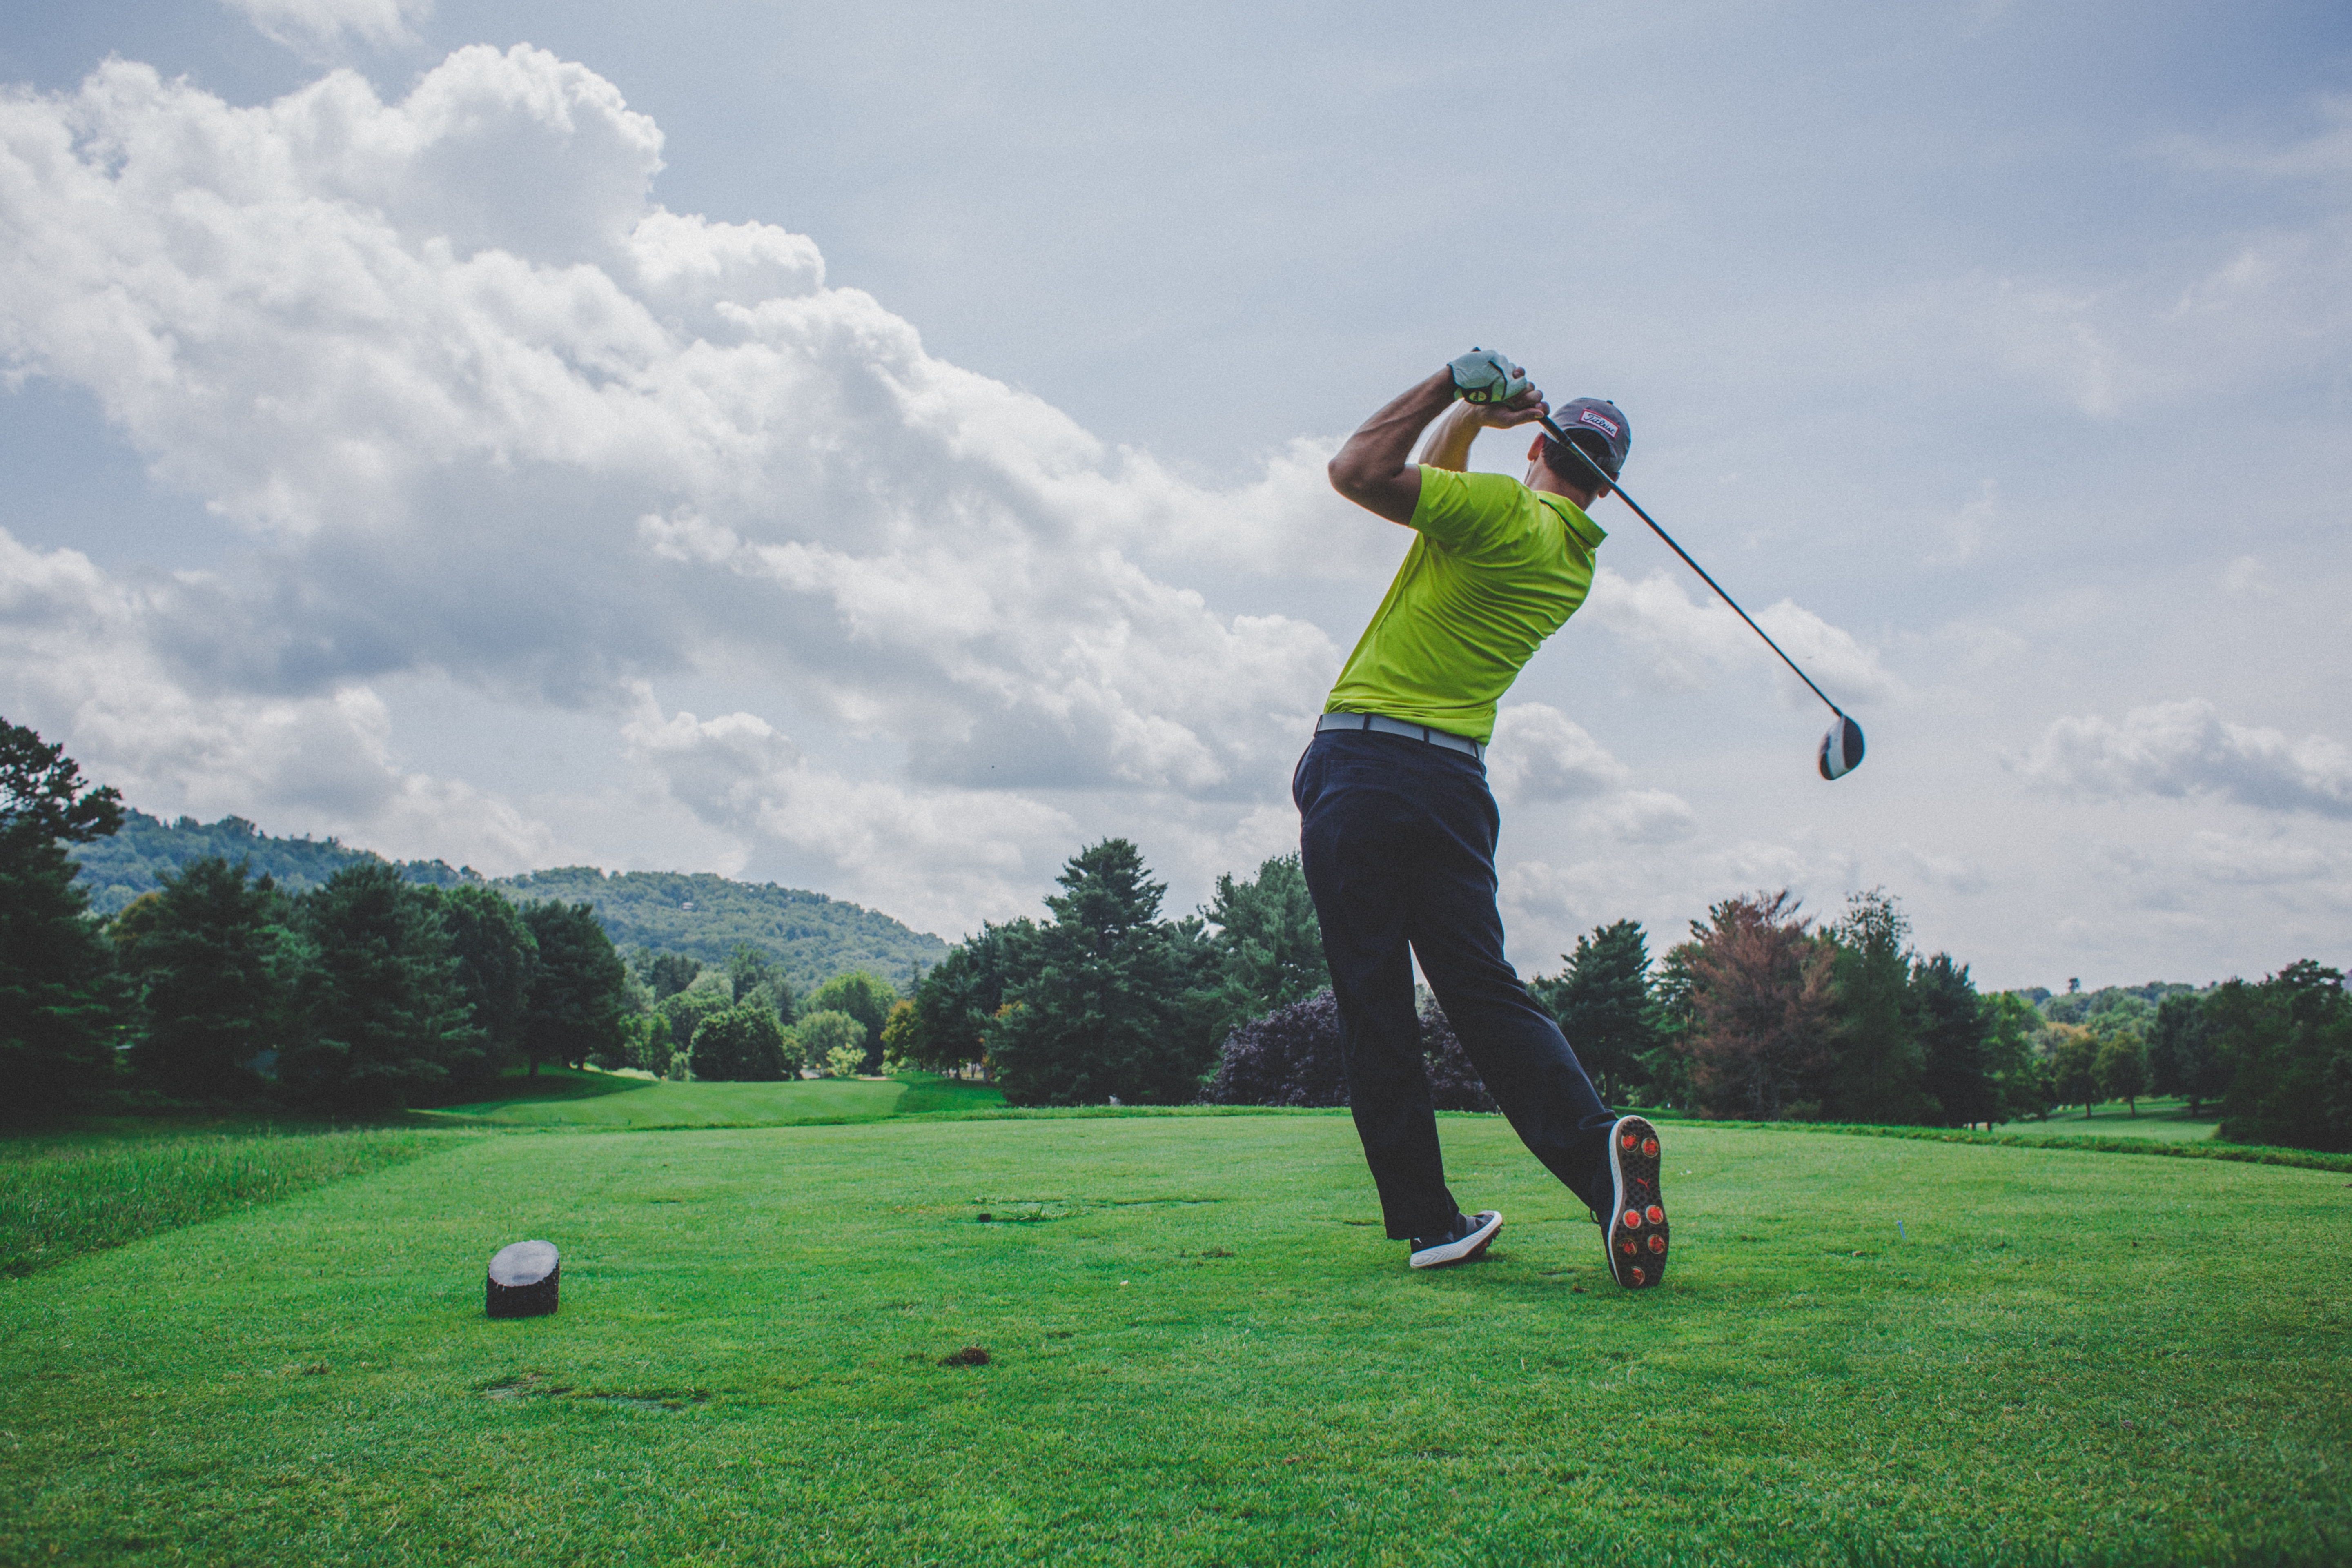 A man swings a golf club on a bright green, under a sky of scattered clouds.